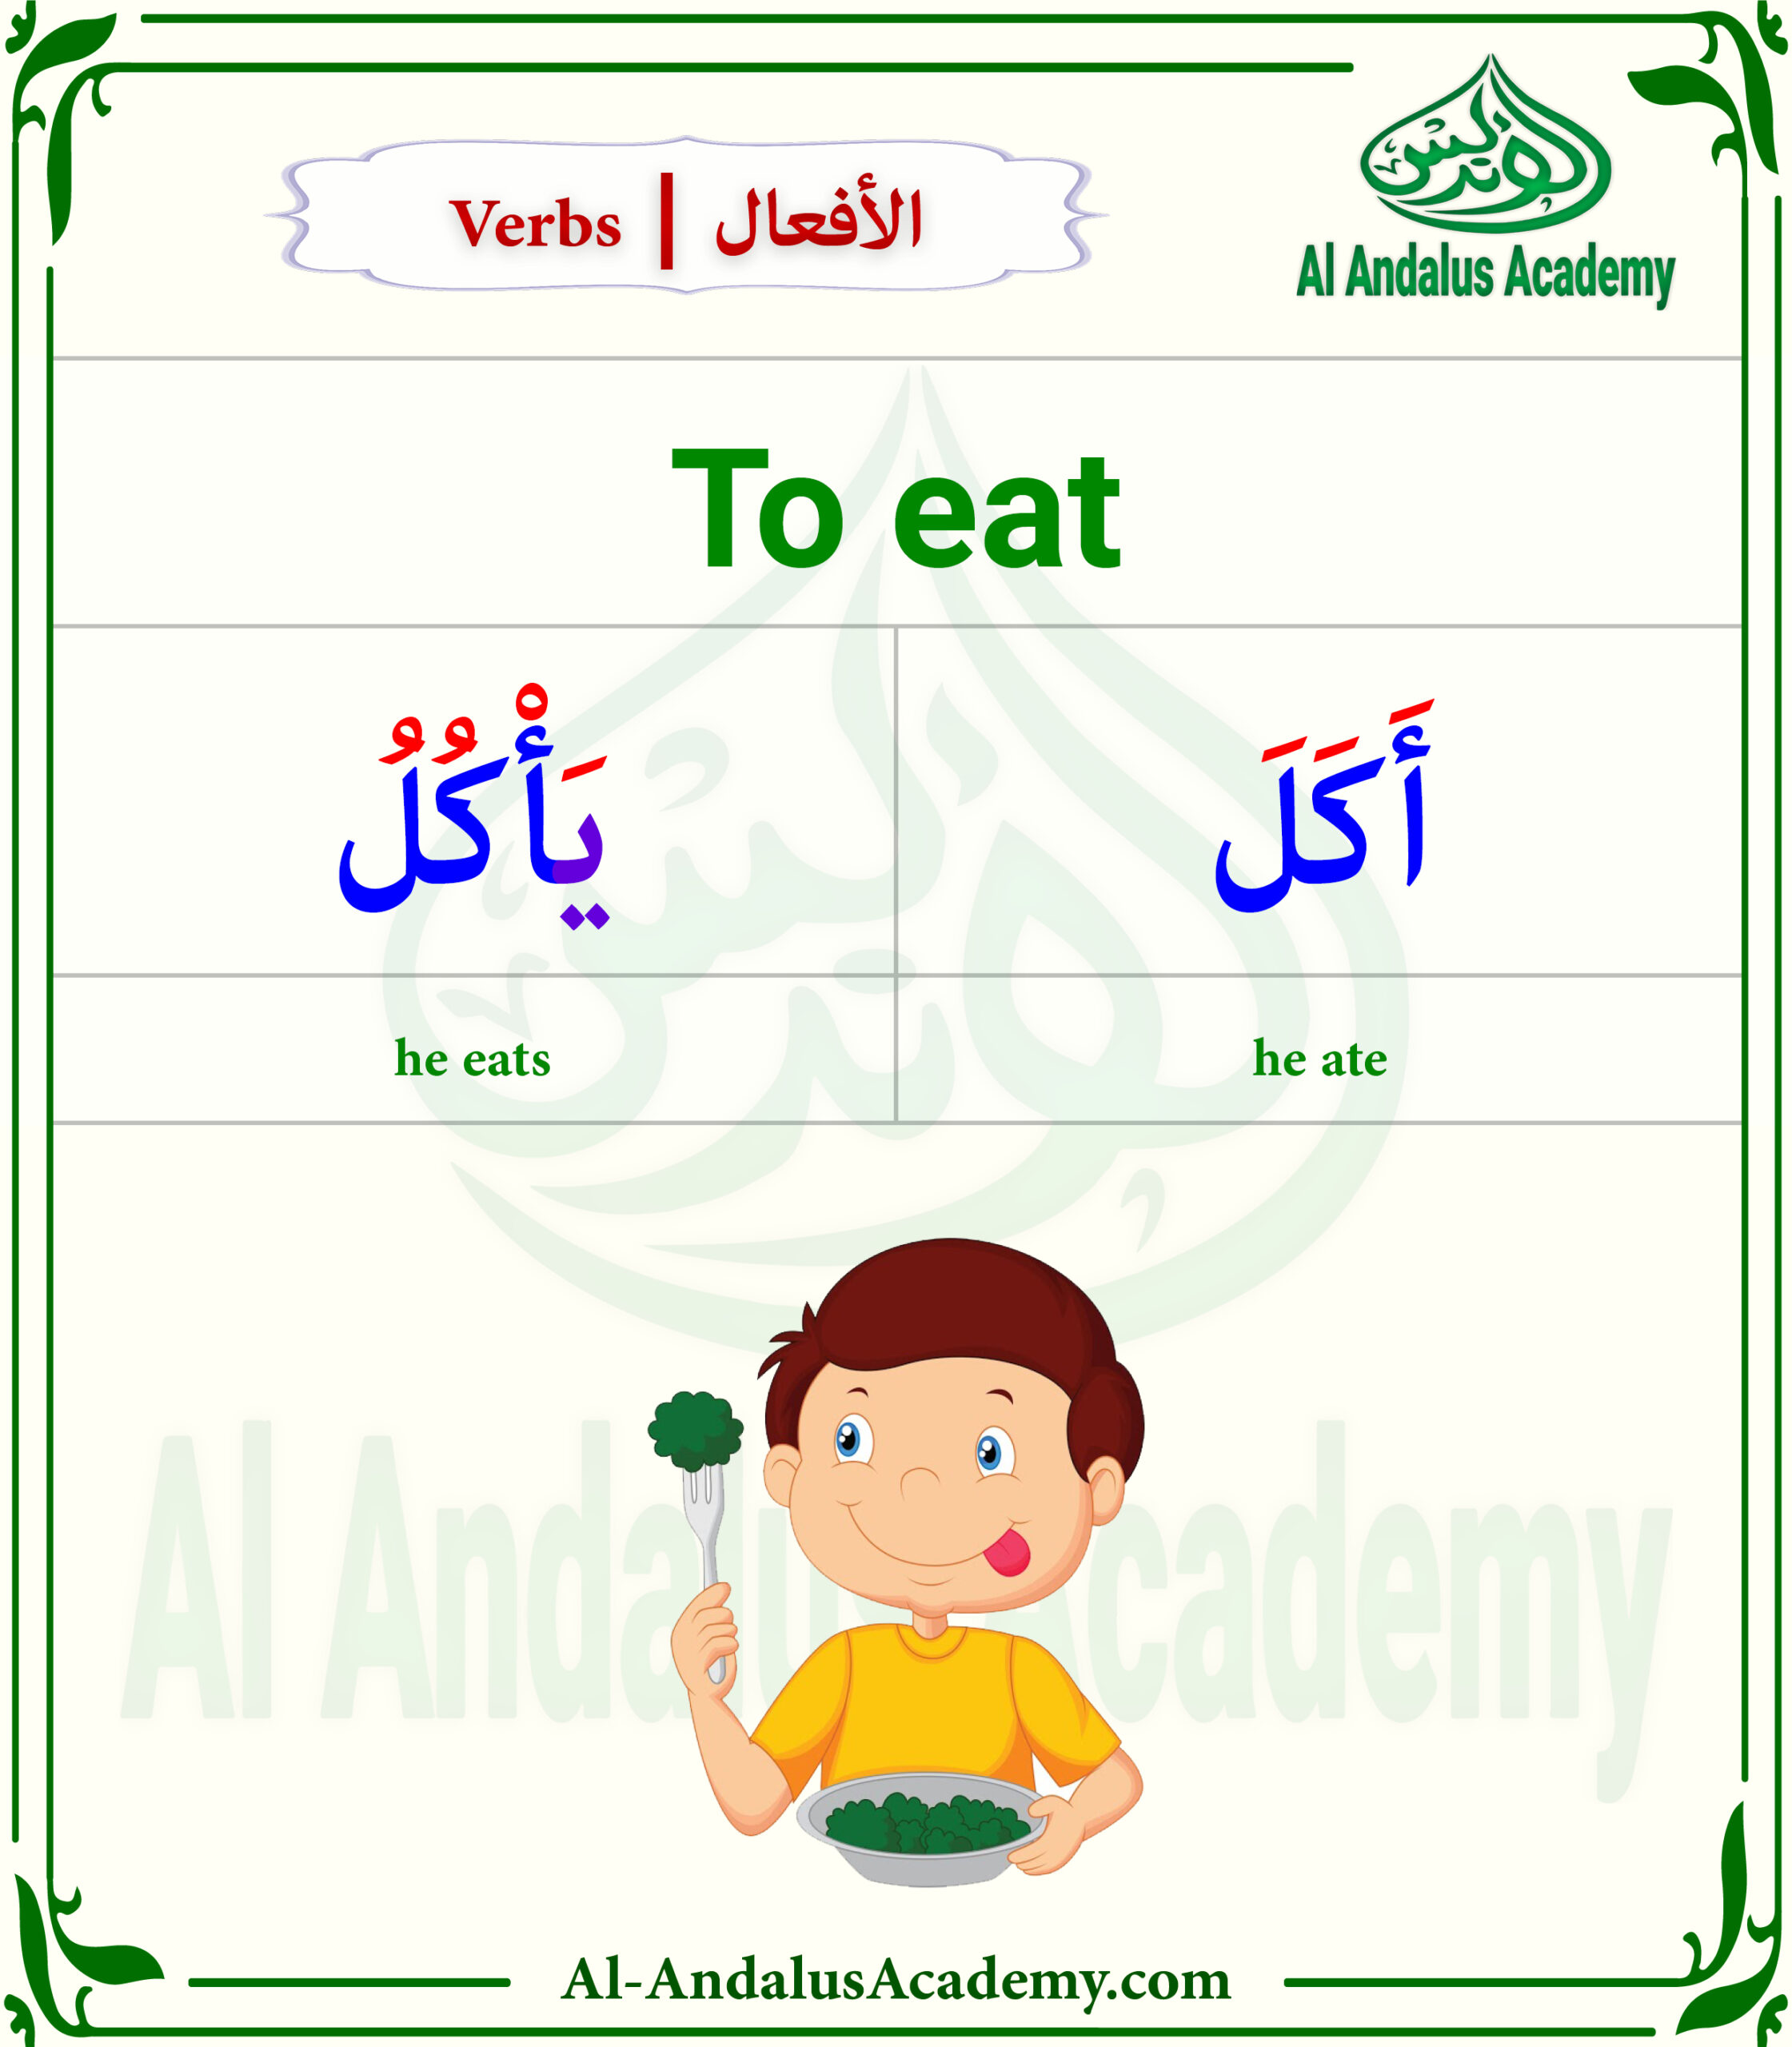 The verb to eat in Arabic